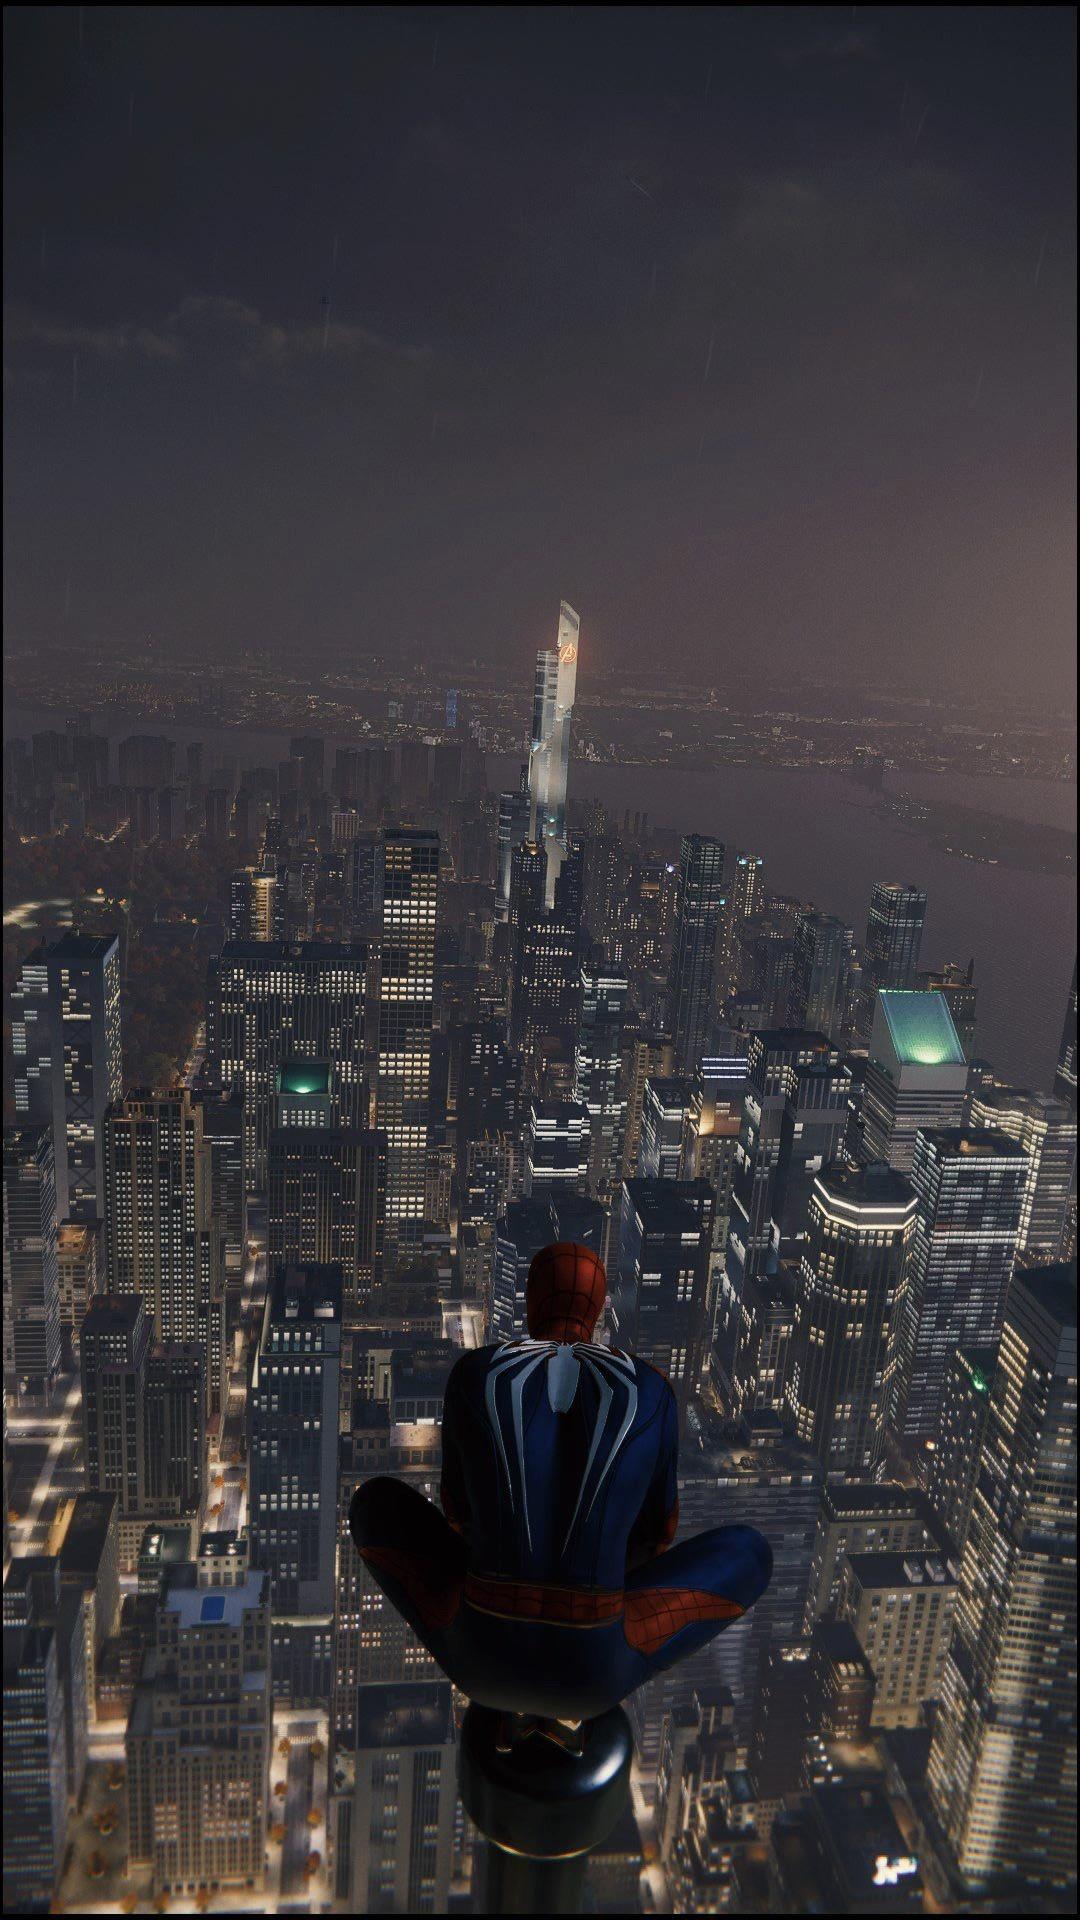 Spider Man PS4 Wallpaper. Empire State